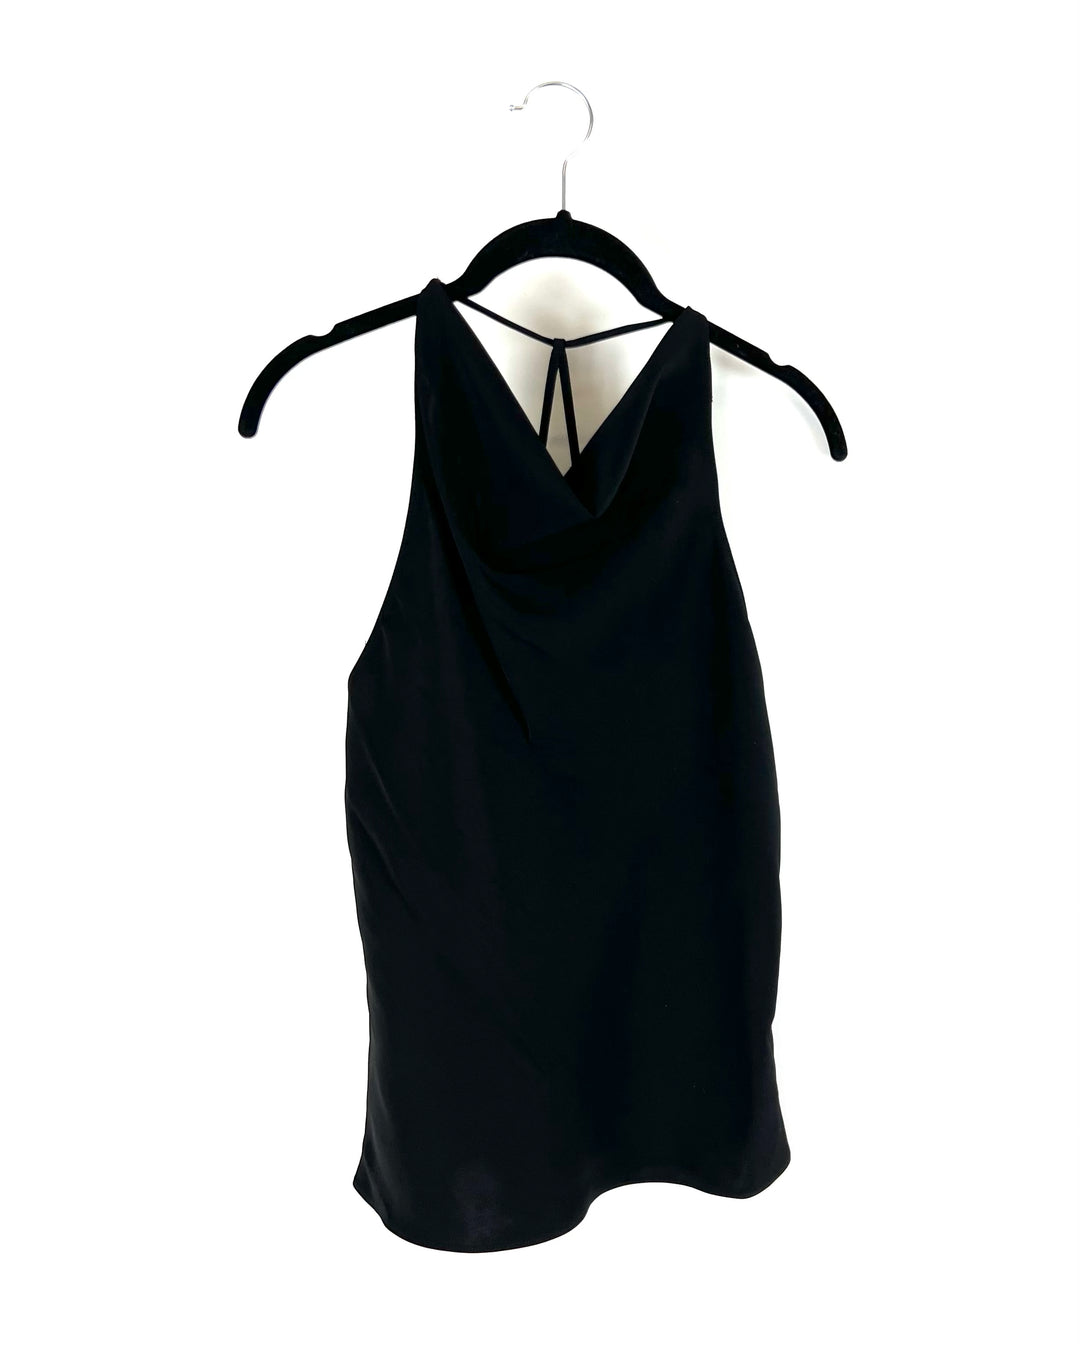 Black Strappy Top - Extra Small, and Medium